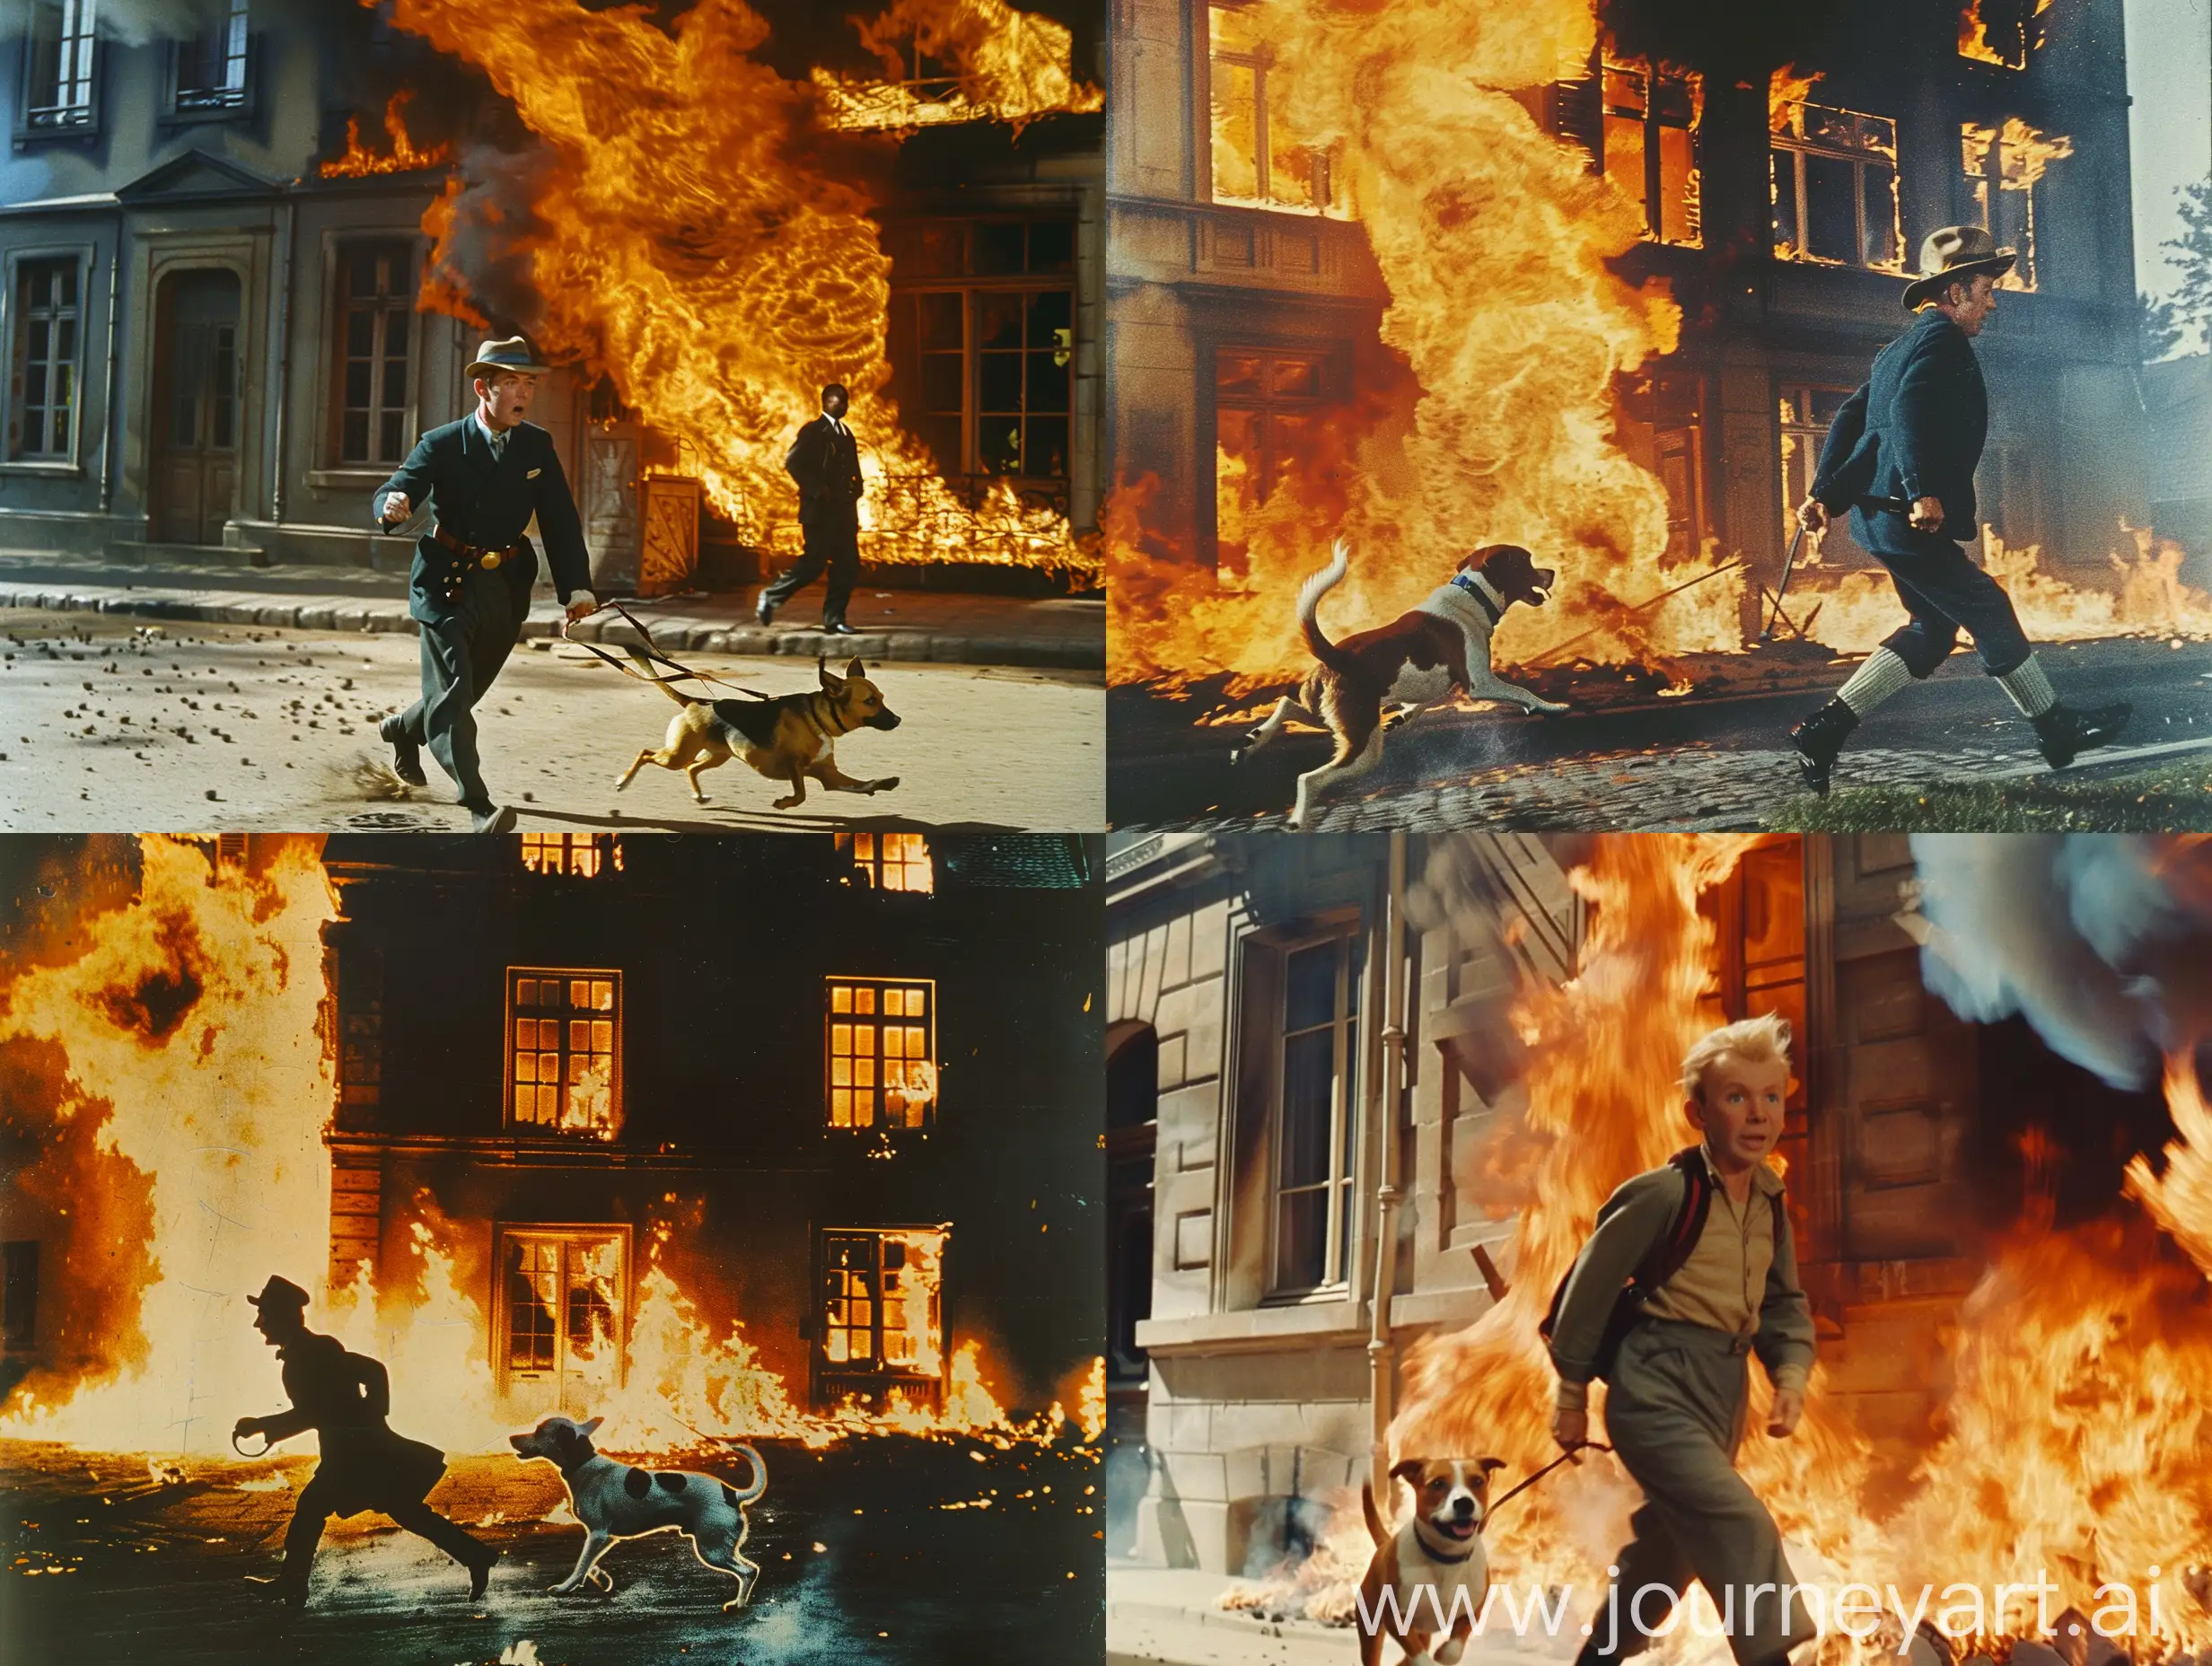 Tintin-and-Dog-Flee-Burning-1950s-Building-Superpanavision-70-Color-Image